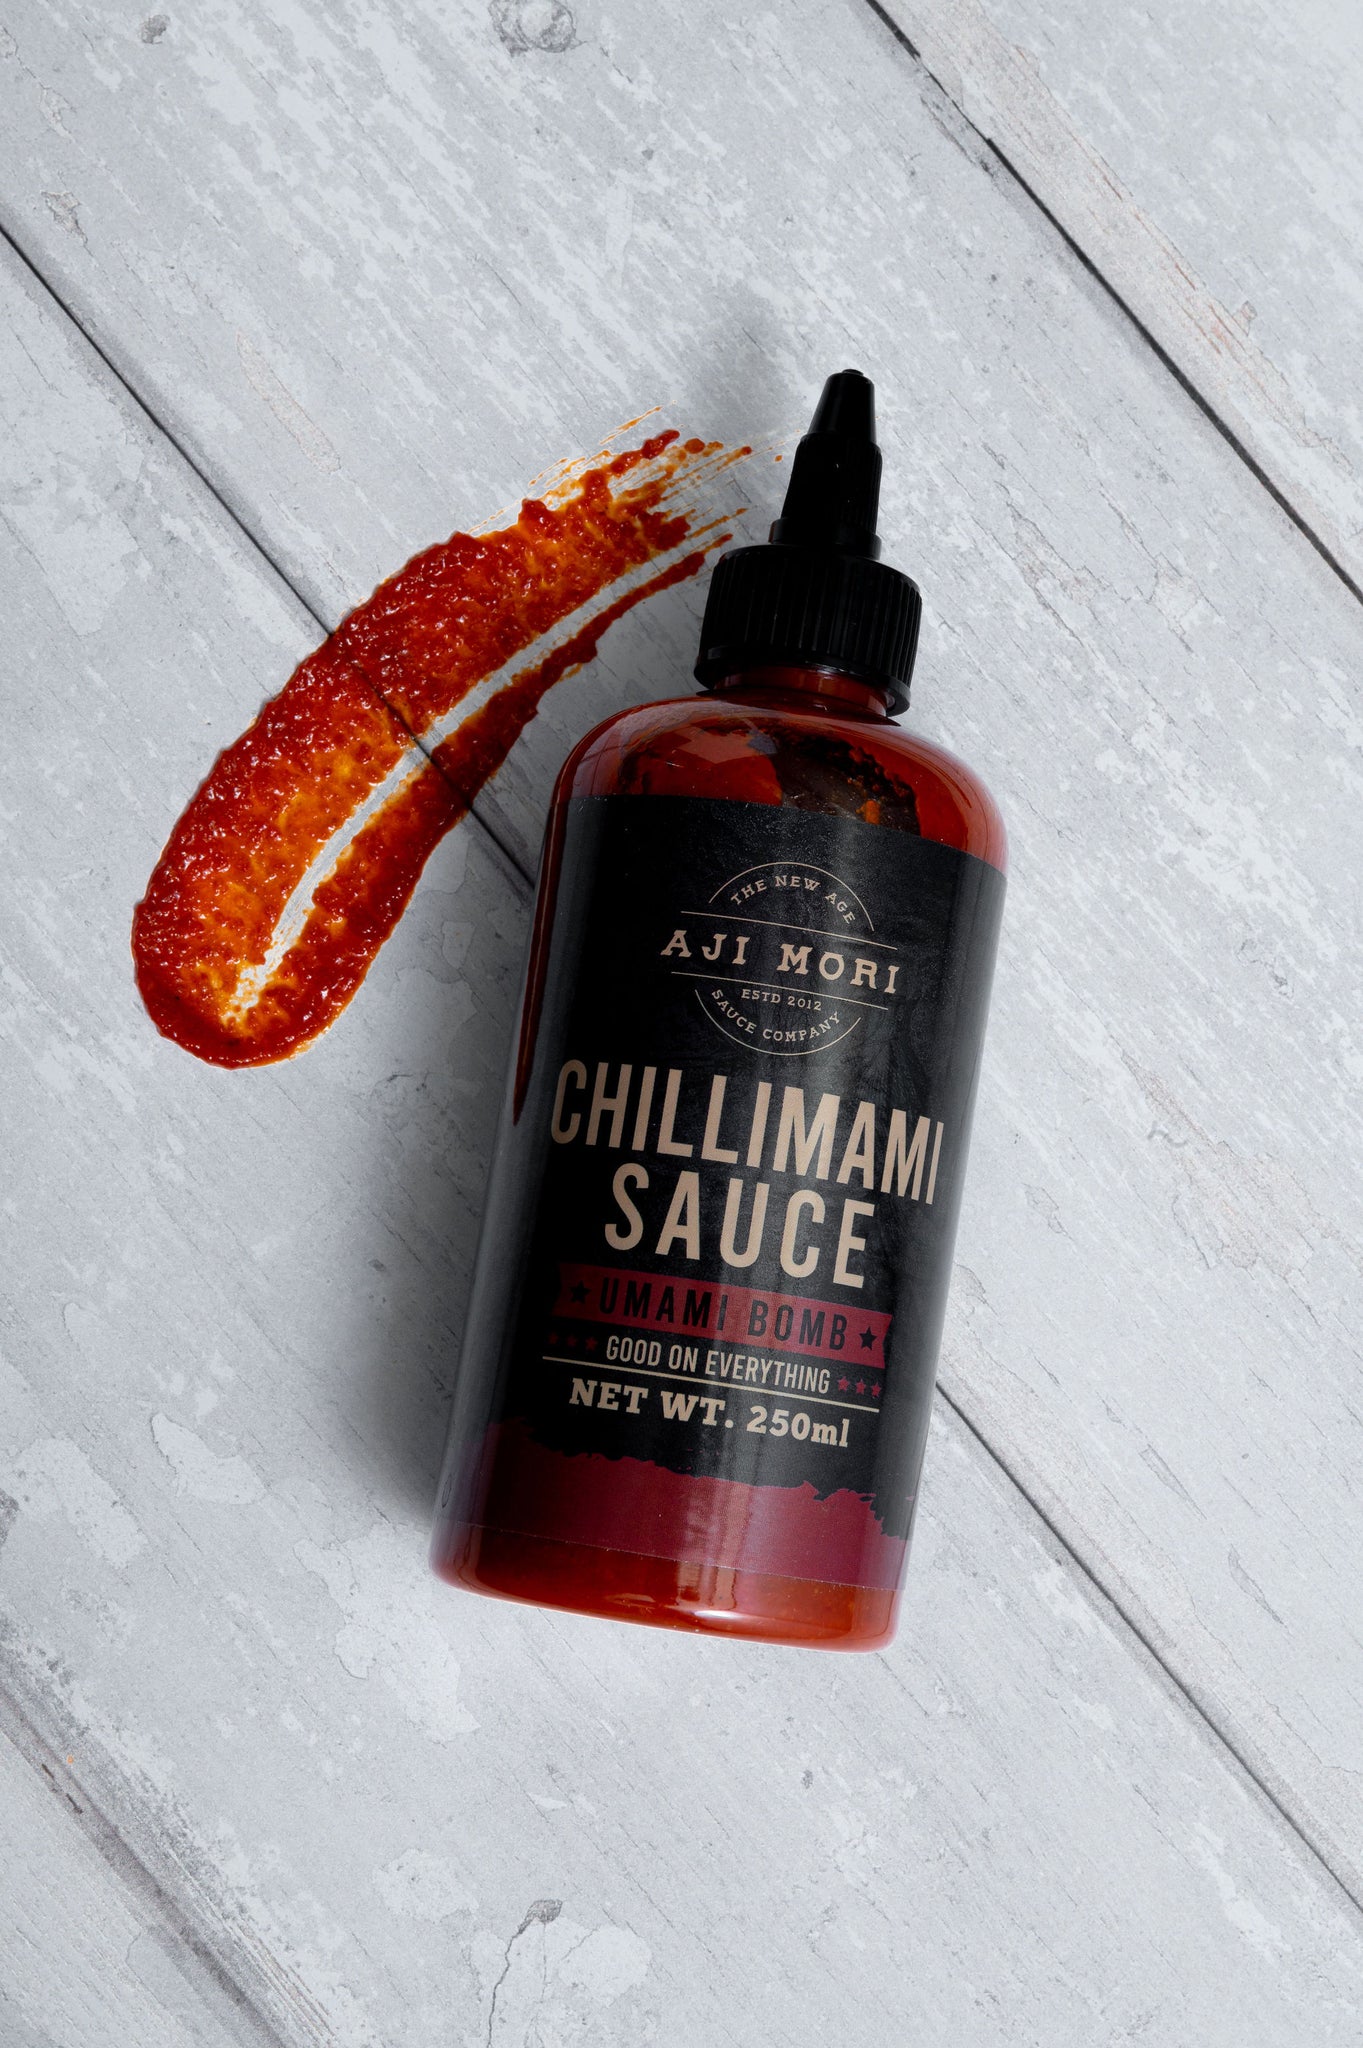 ChilliMami Sauce